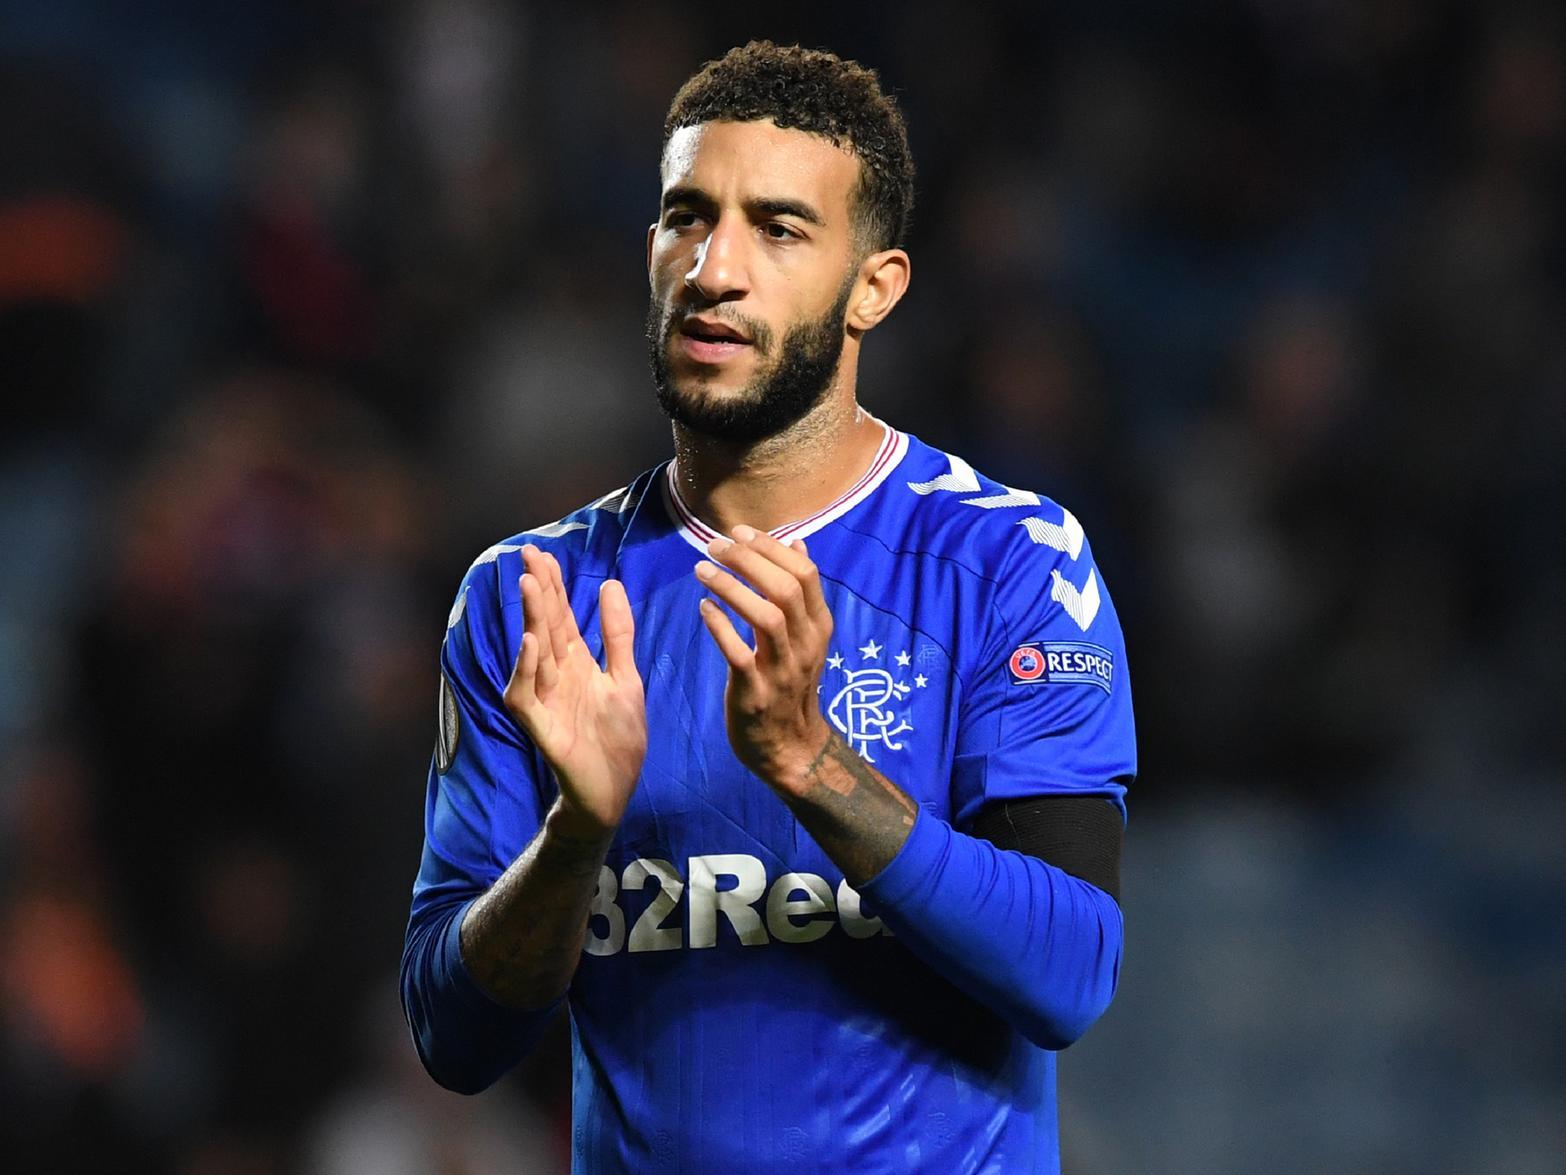 Leeds United are said to have joined Fulham in the race to sign Rangers defender Connor Goldson, who is continuing to impress with the Scottish giants in both the league and in Europe. (Football Insider)